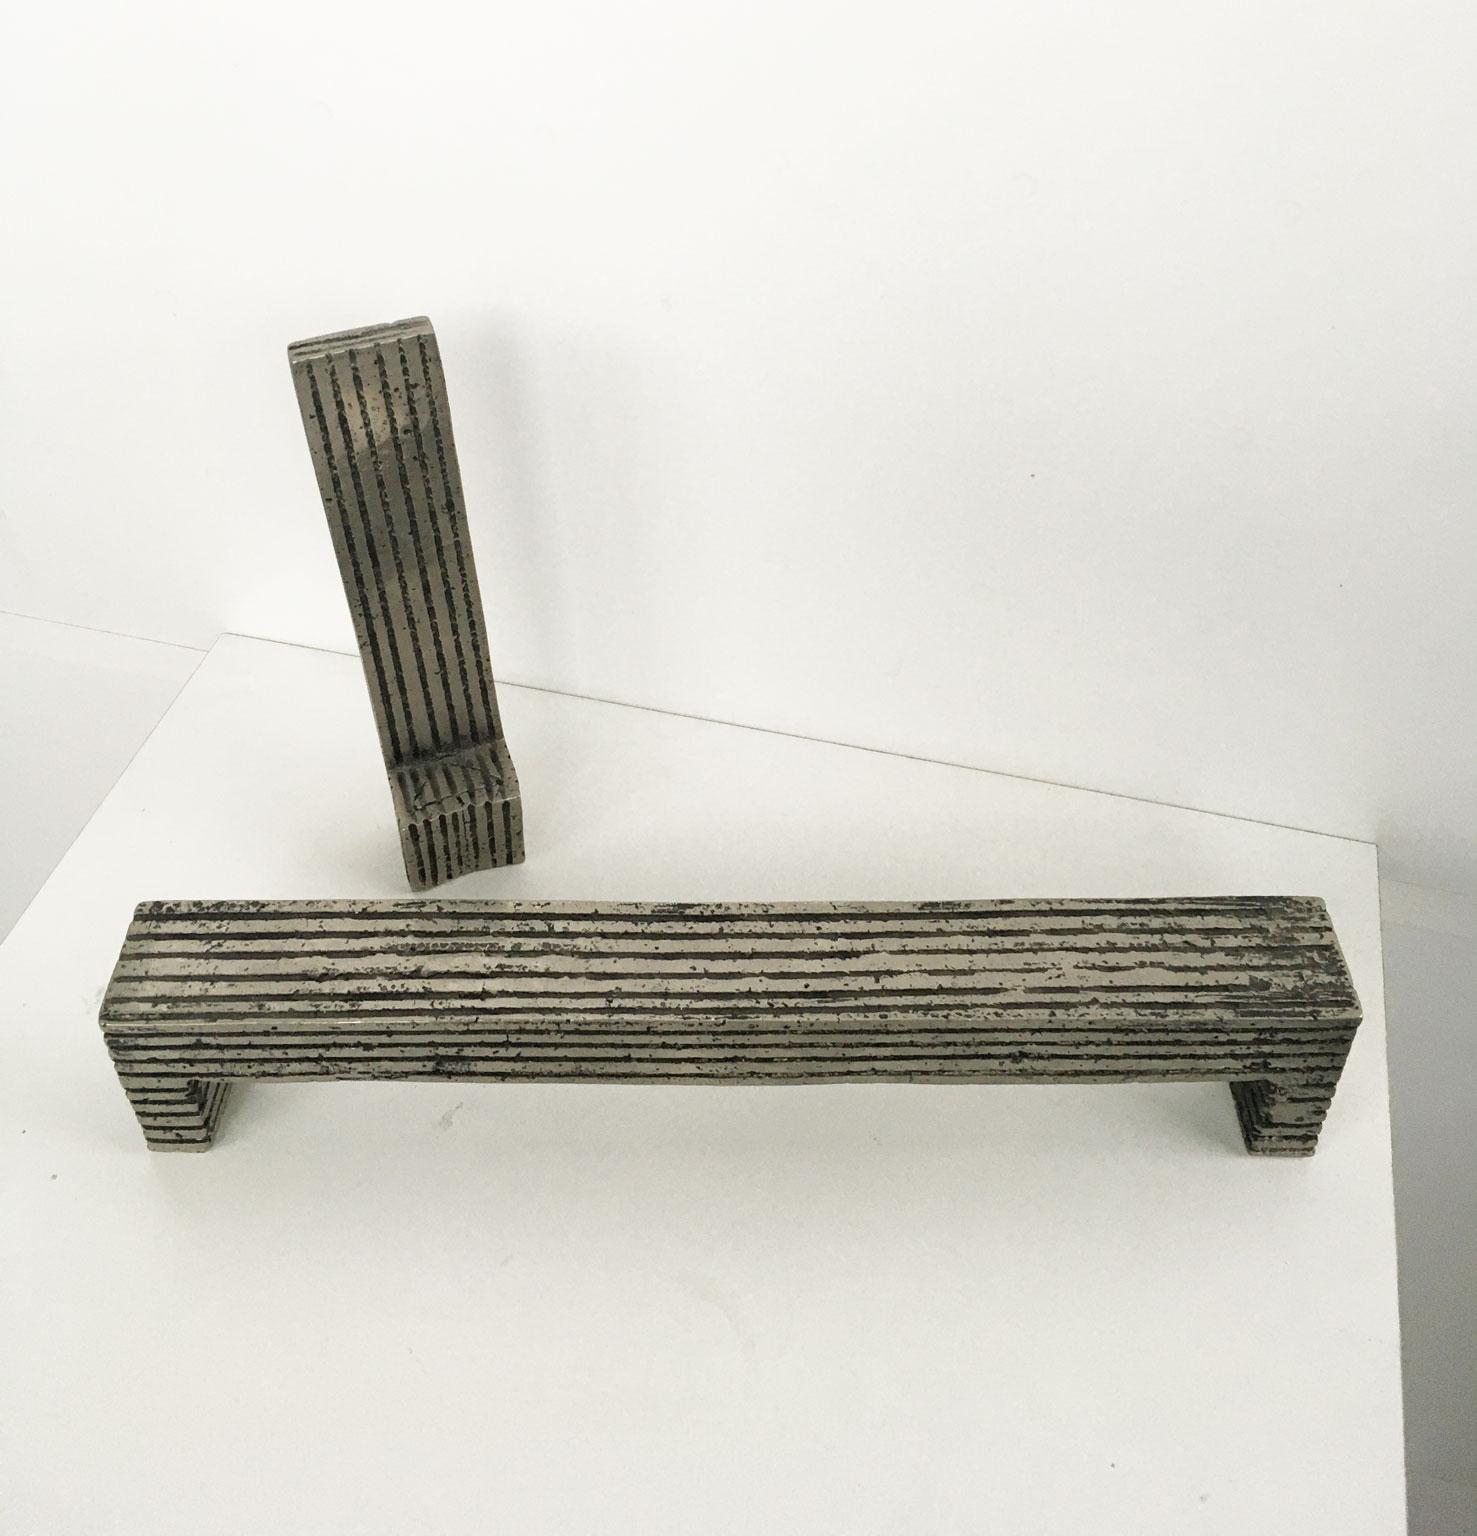 Urano Palma is an Italian artist who starts to create his artworks following the philosophy of Lucio Fontana.
He specially worked to the sculptured furniture, inventing a casting technique to obtain the perforated solid metal.
The chair is